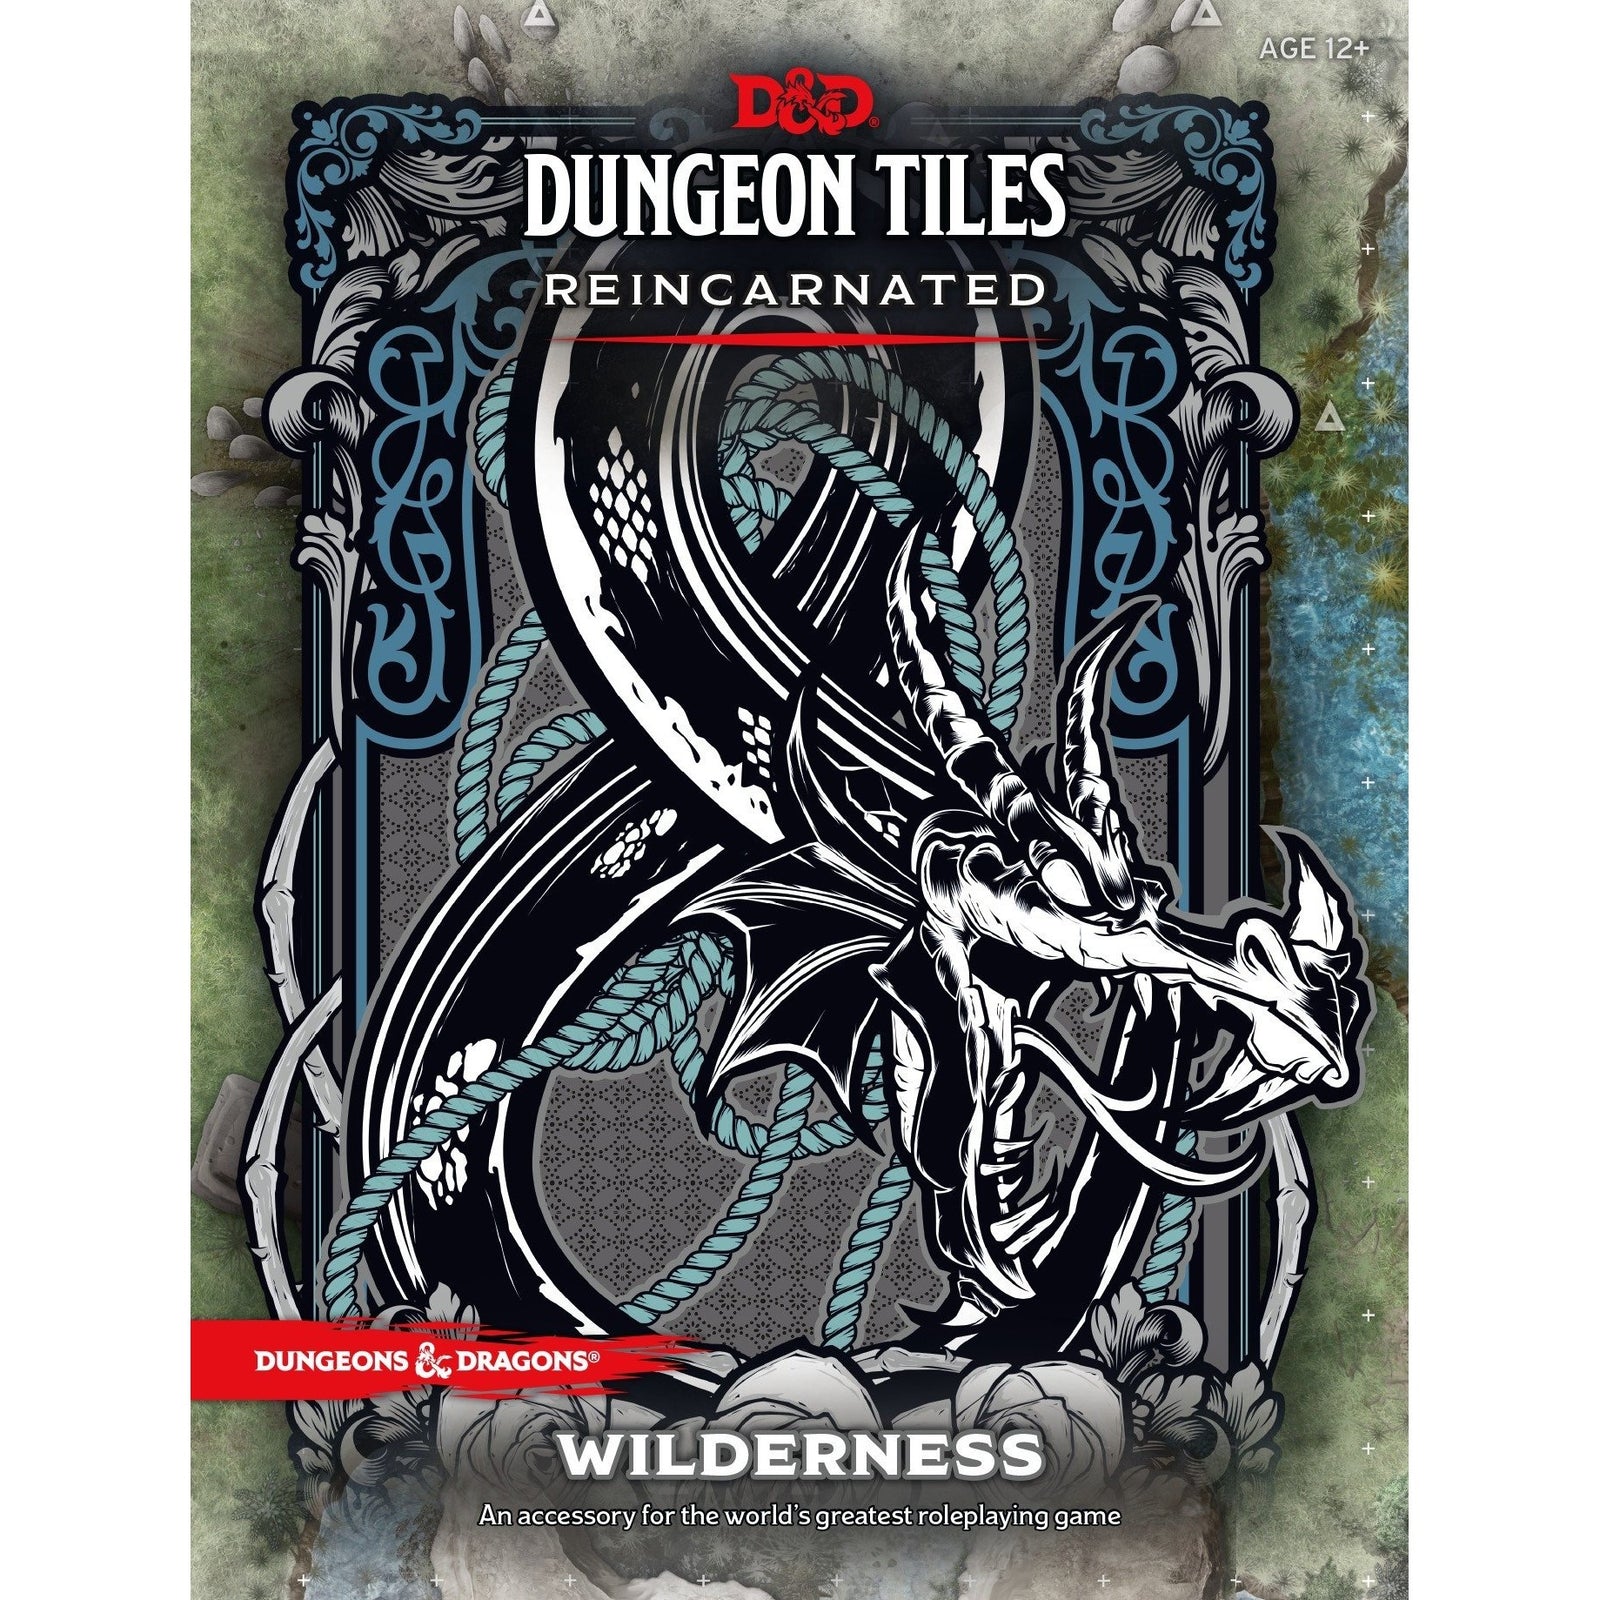 Dungeons and Dragons: Dungeon Tiles Reincarnated - Wilderness